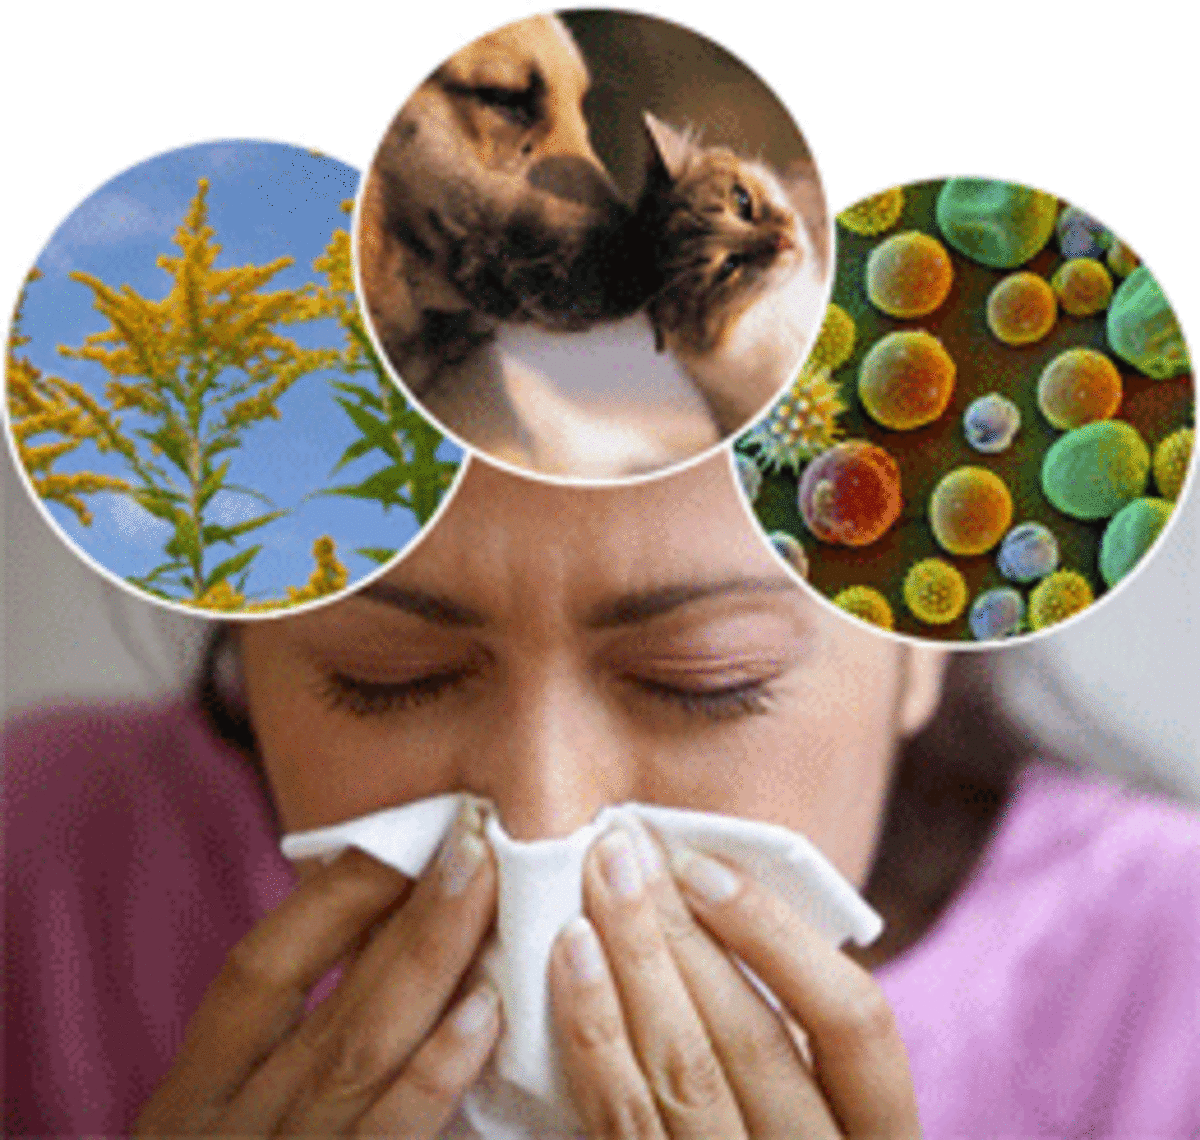 Allergy means unusual hypersensitivity reactions to certain daily substances.